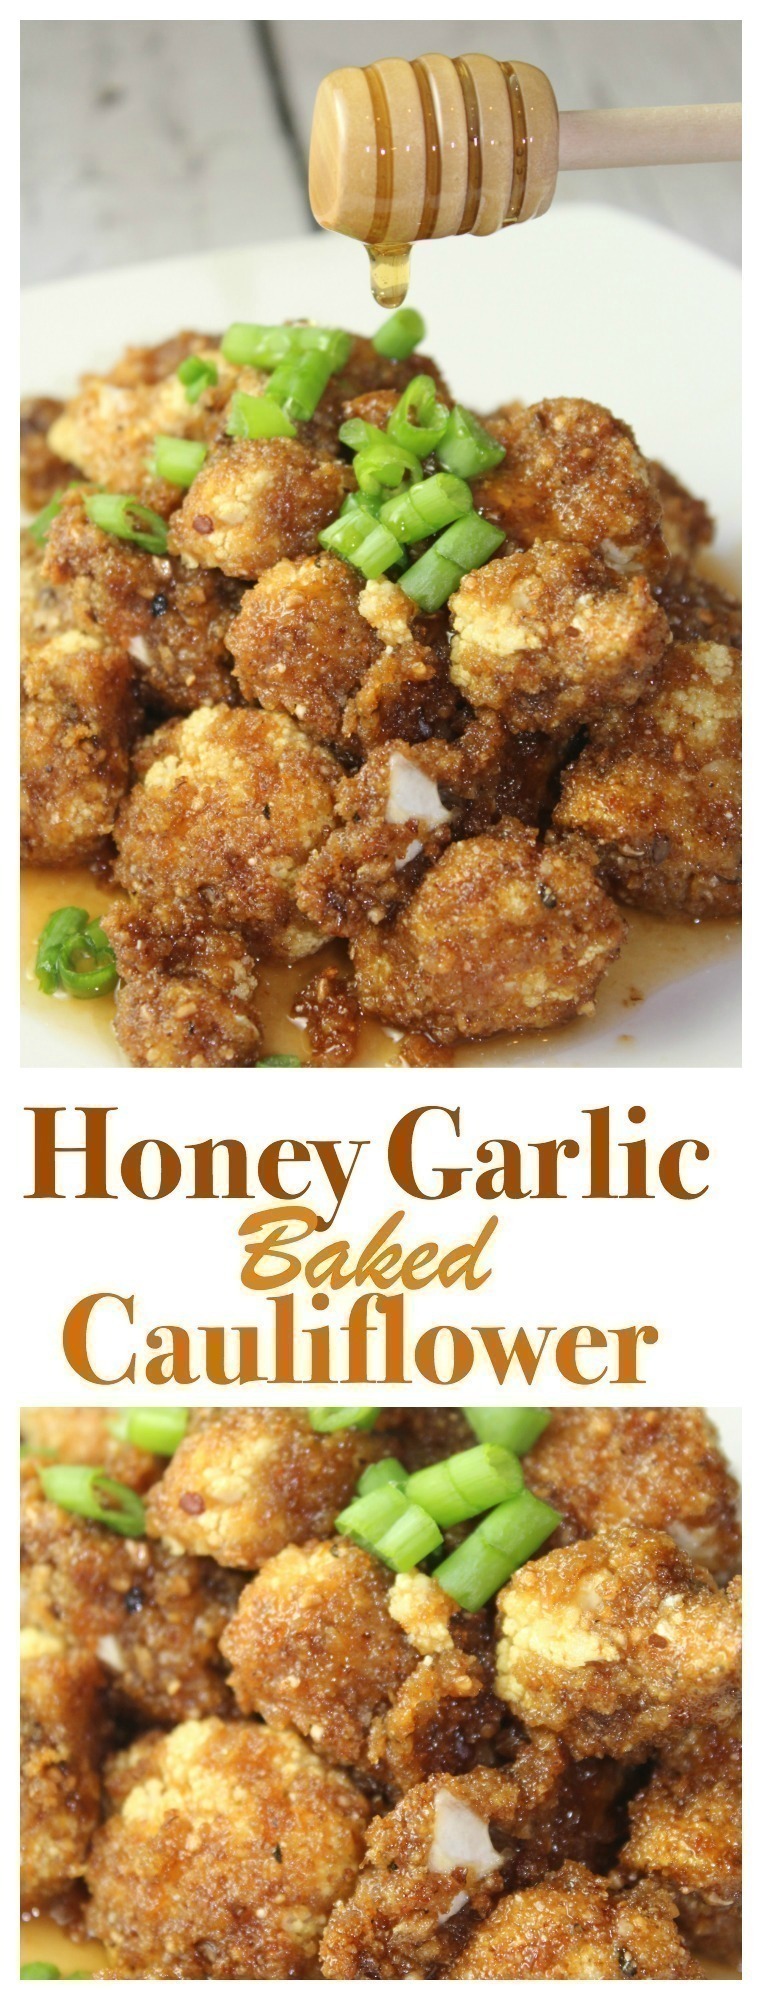 This healthy honey garlic baked cauliflower comes together easily with simple ingredients and is perfect for a simple meatless meal option!   #cauliflower #baked #healthy #meatless #honey #garlic #dinner #easydinner 